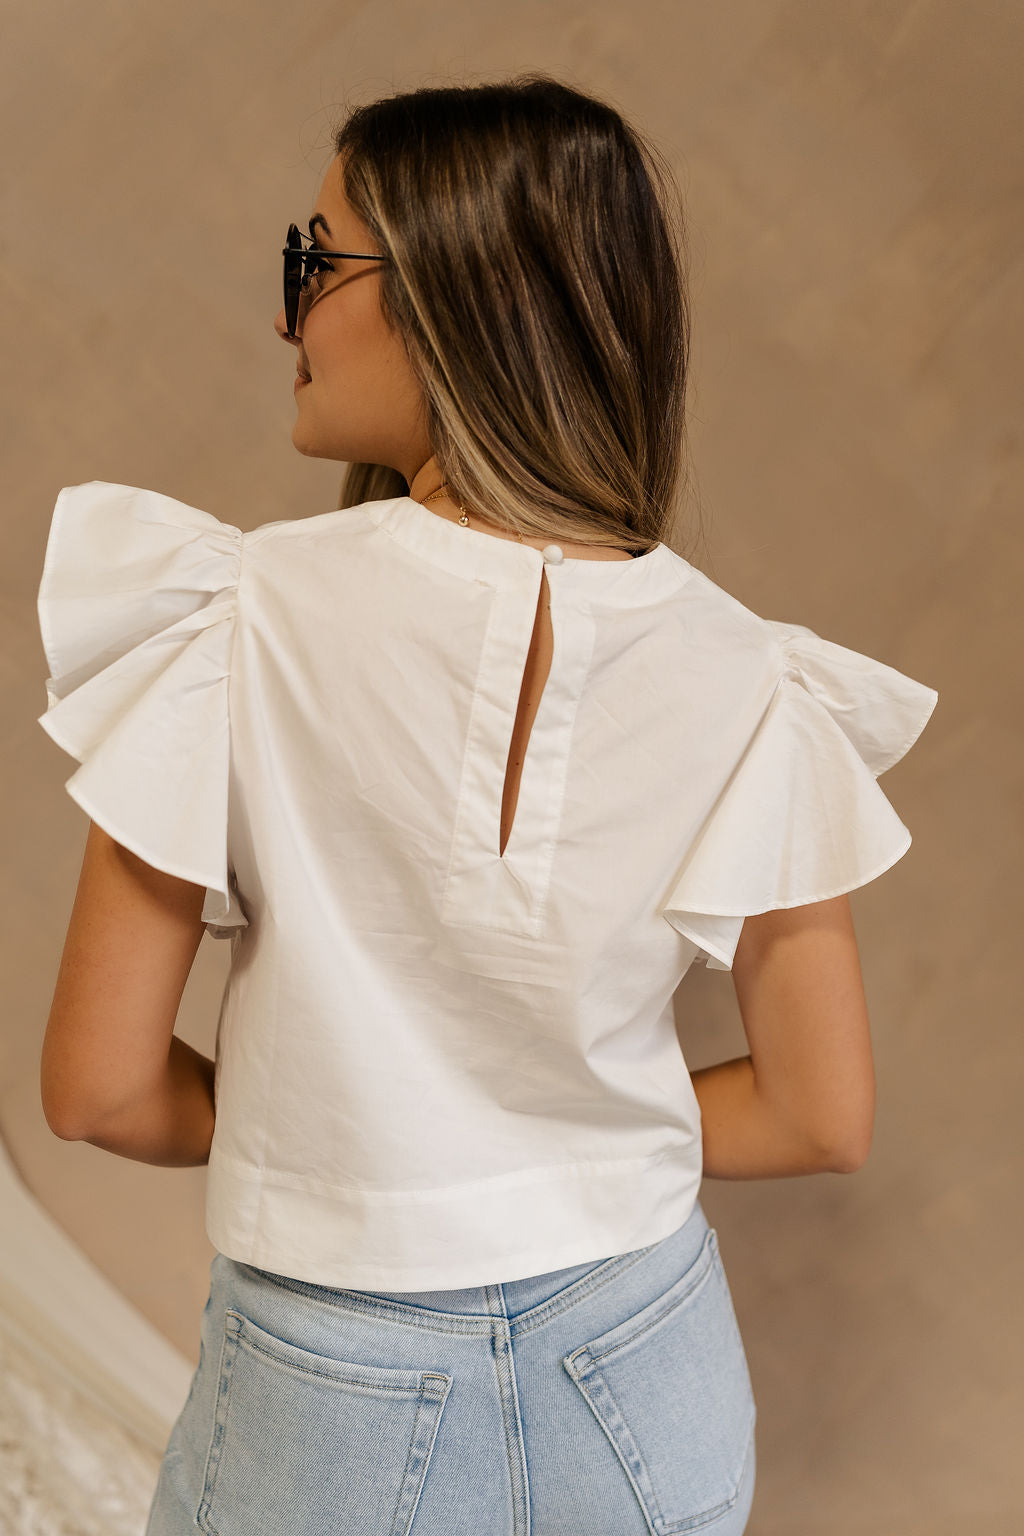 Back view of female model wearing the Jemma White Ruffle Top that has white fabric, short ruffled cap sleeves, a v neckline, and keyhole back. Worn with blue jeans.